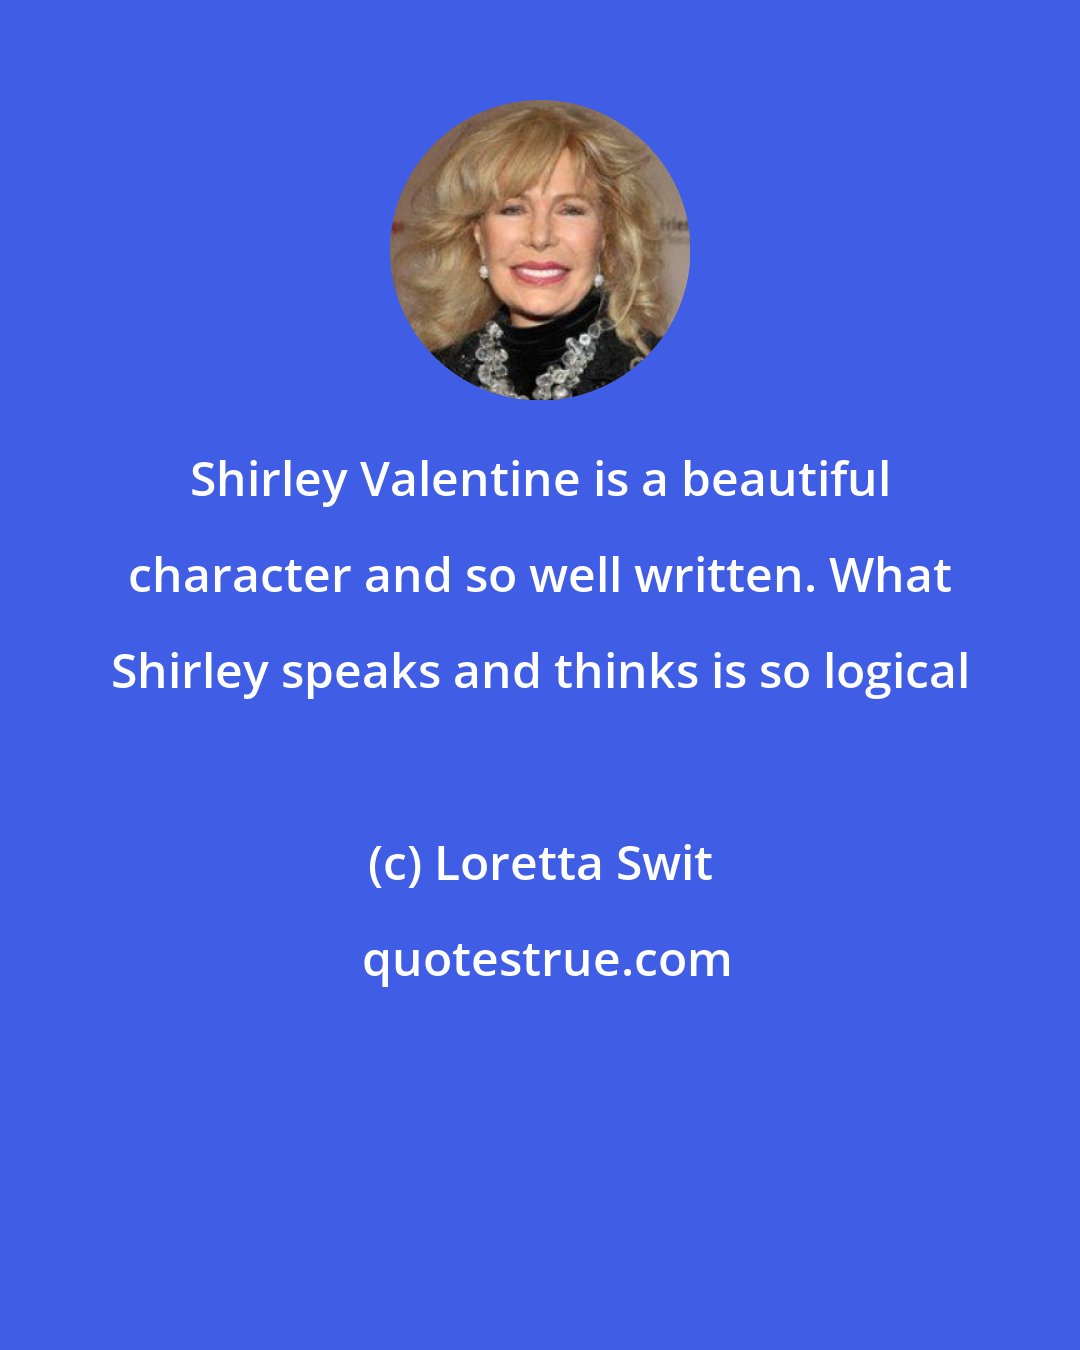 Loretta Swit: Shirley Valentine is a beautiful character and so well written. What Shirley speaks and thinks is so logical